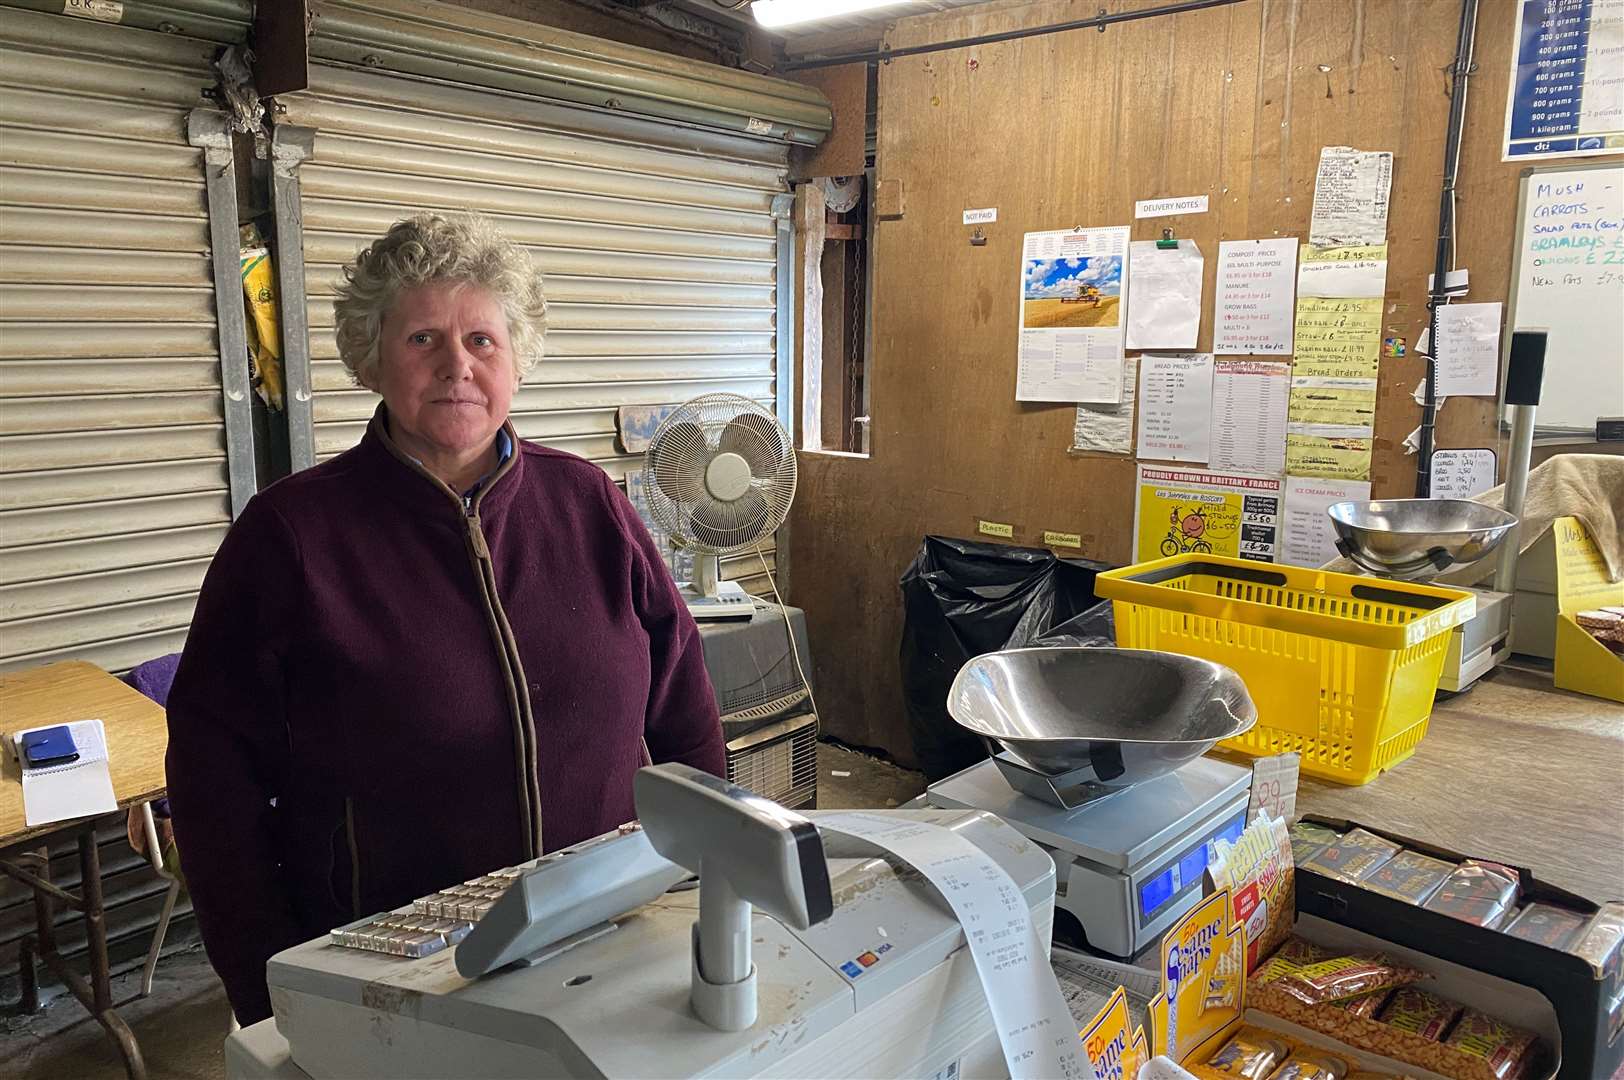 Joanna Miles has worked at the Broad Oak Farm Shop for 17 years